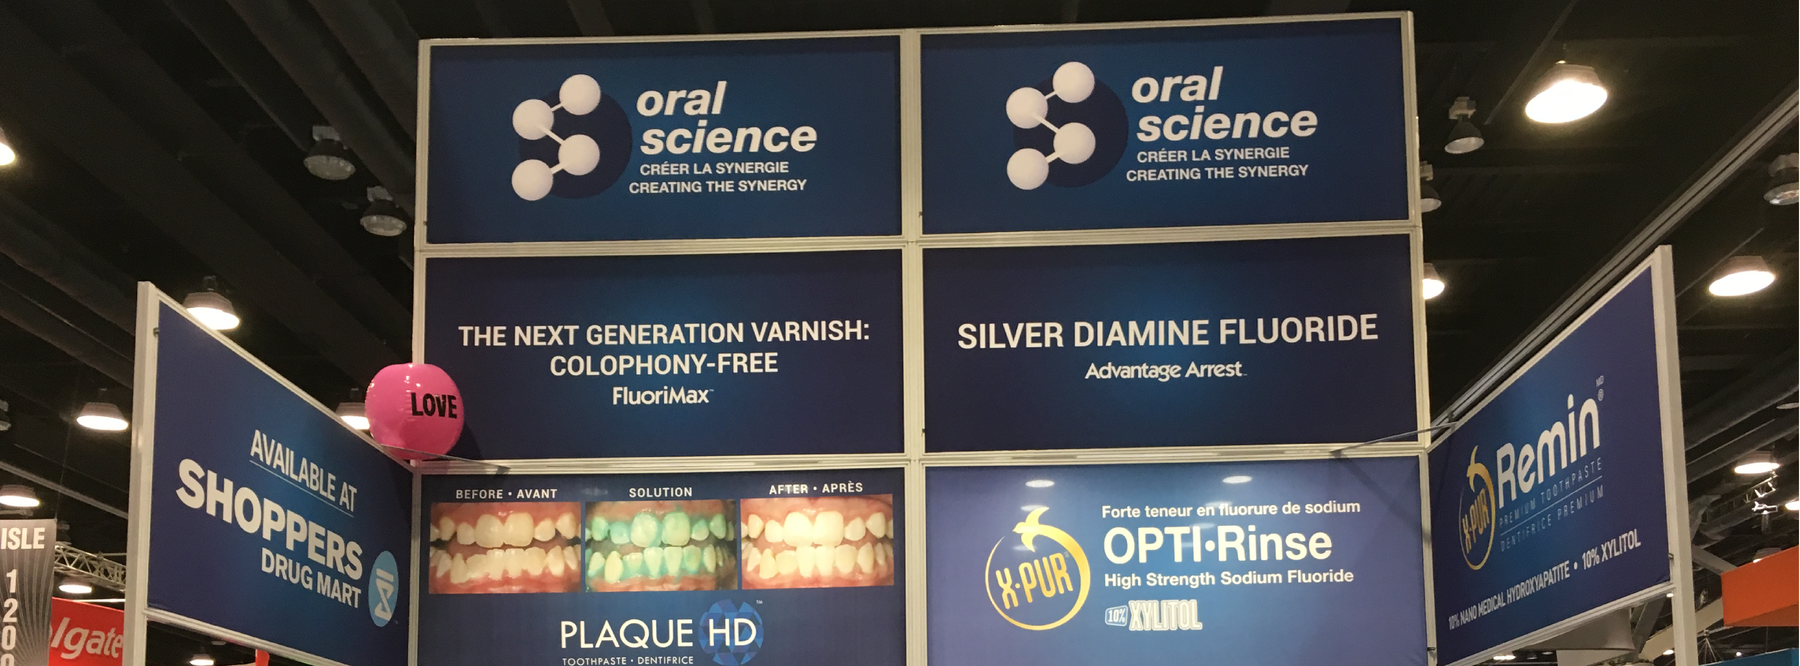 Oral Science Spreads #LOVE at the 2018 Pacific Dental Conference